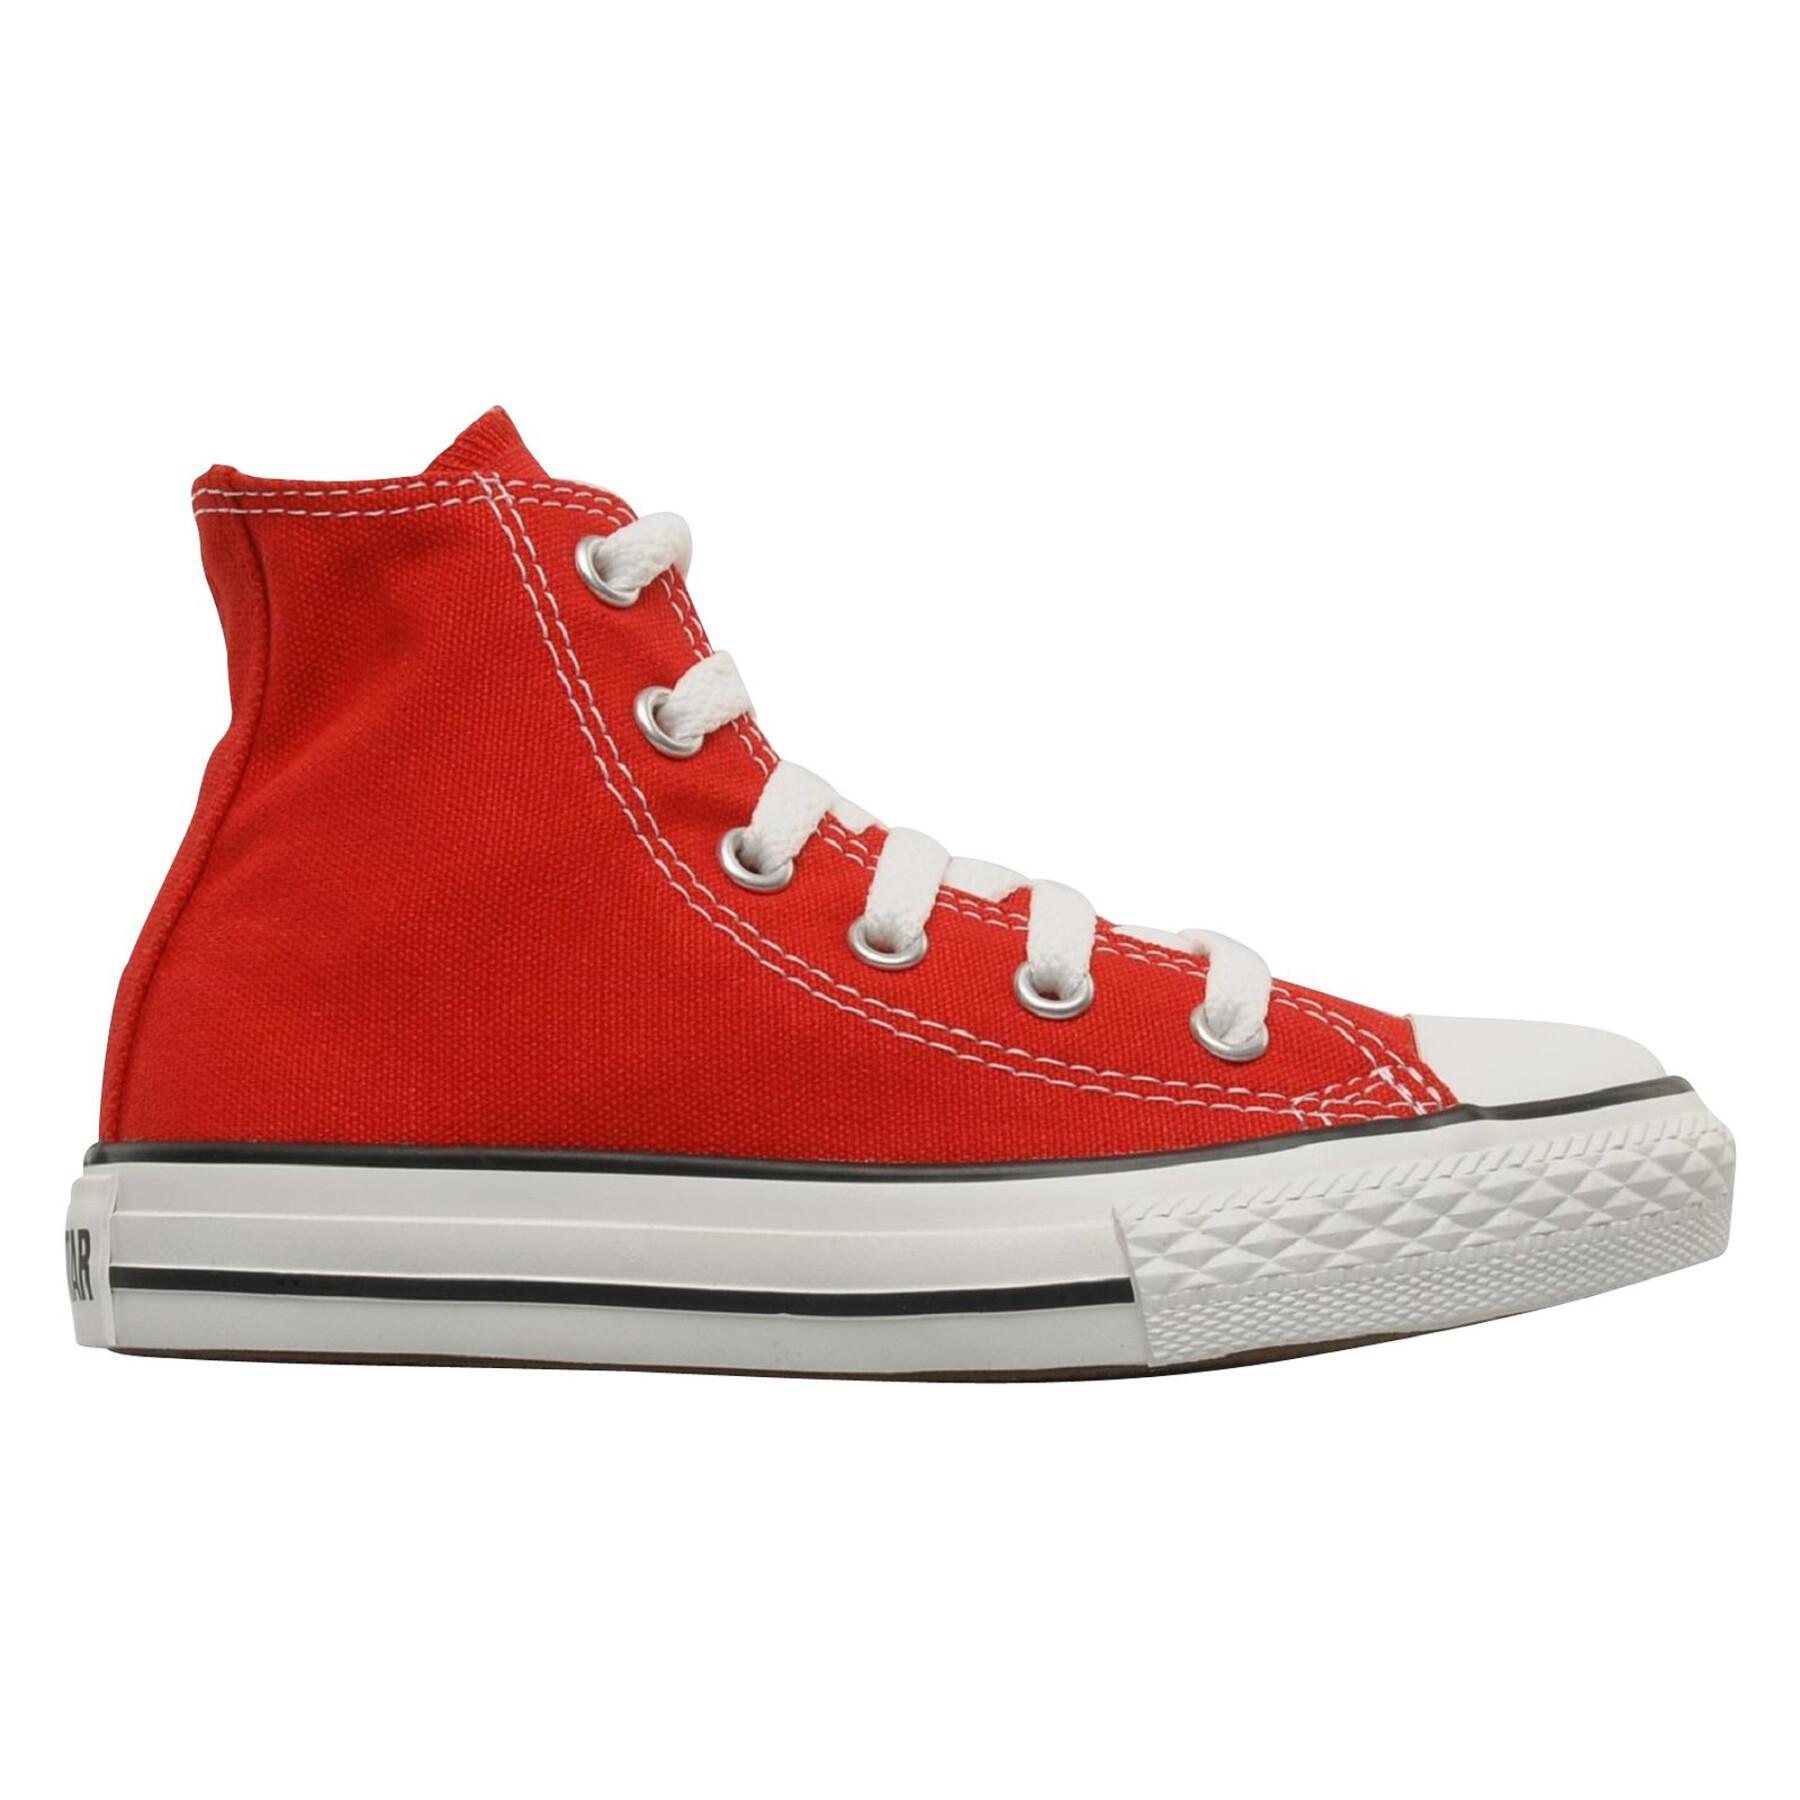 Baby-Sneakers Converse Chuck Taylor All Star Classic